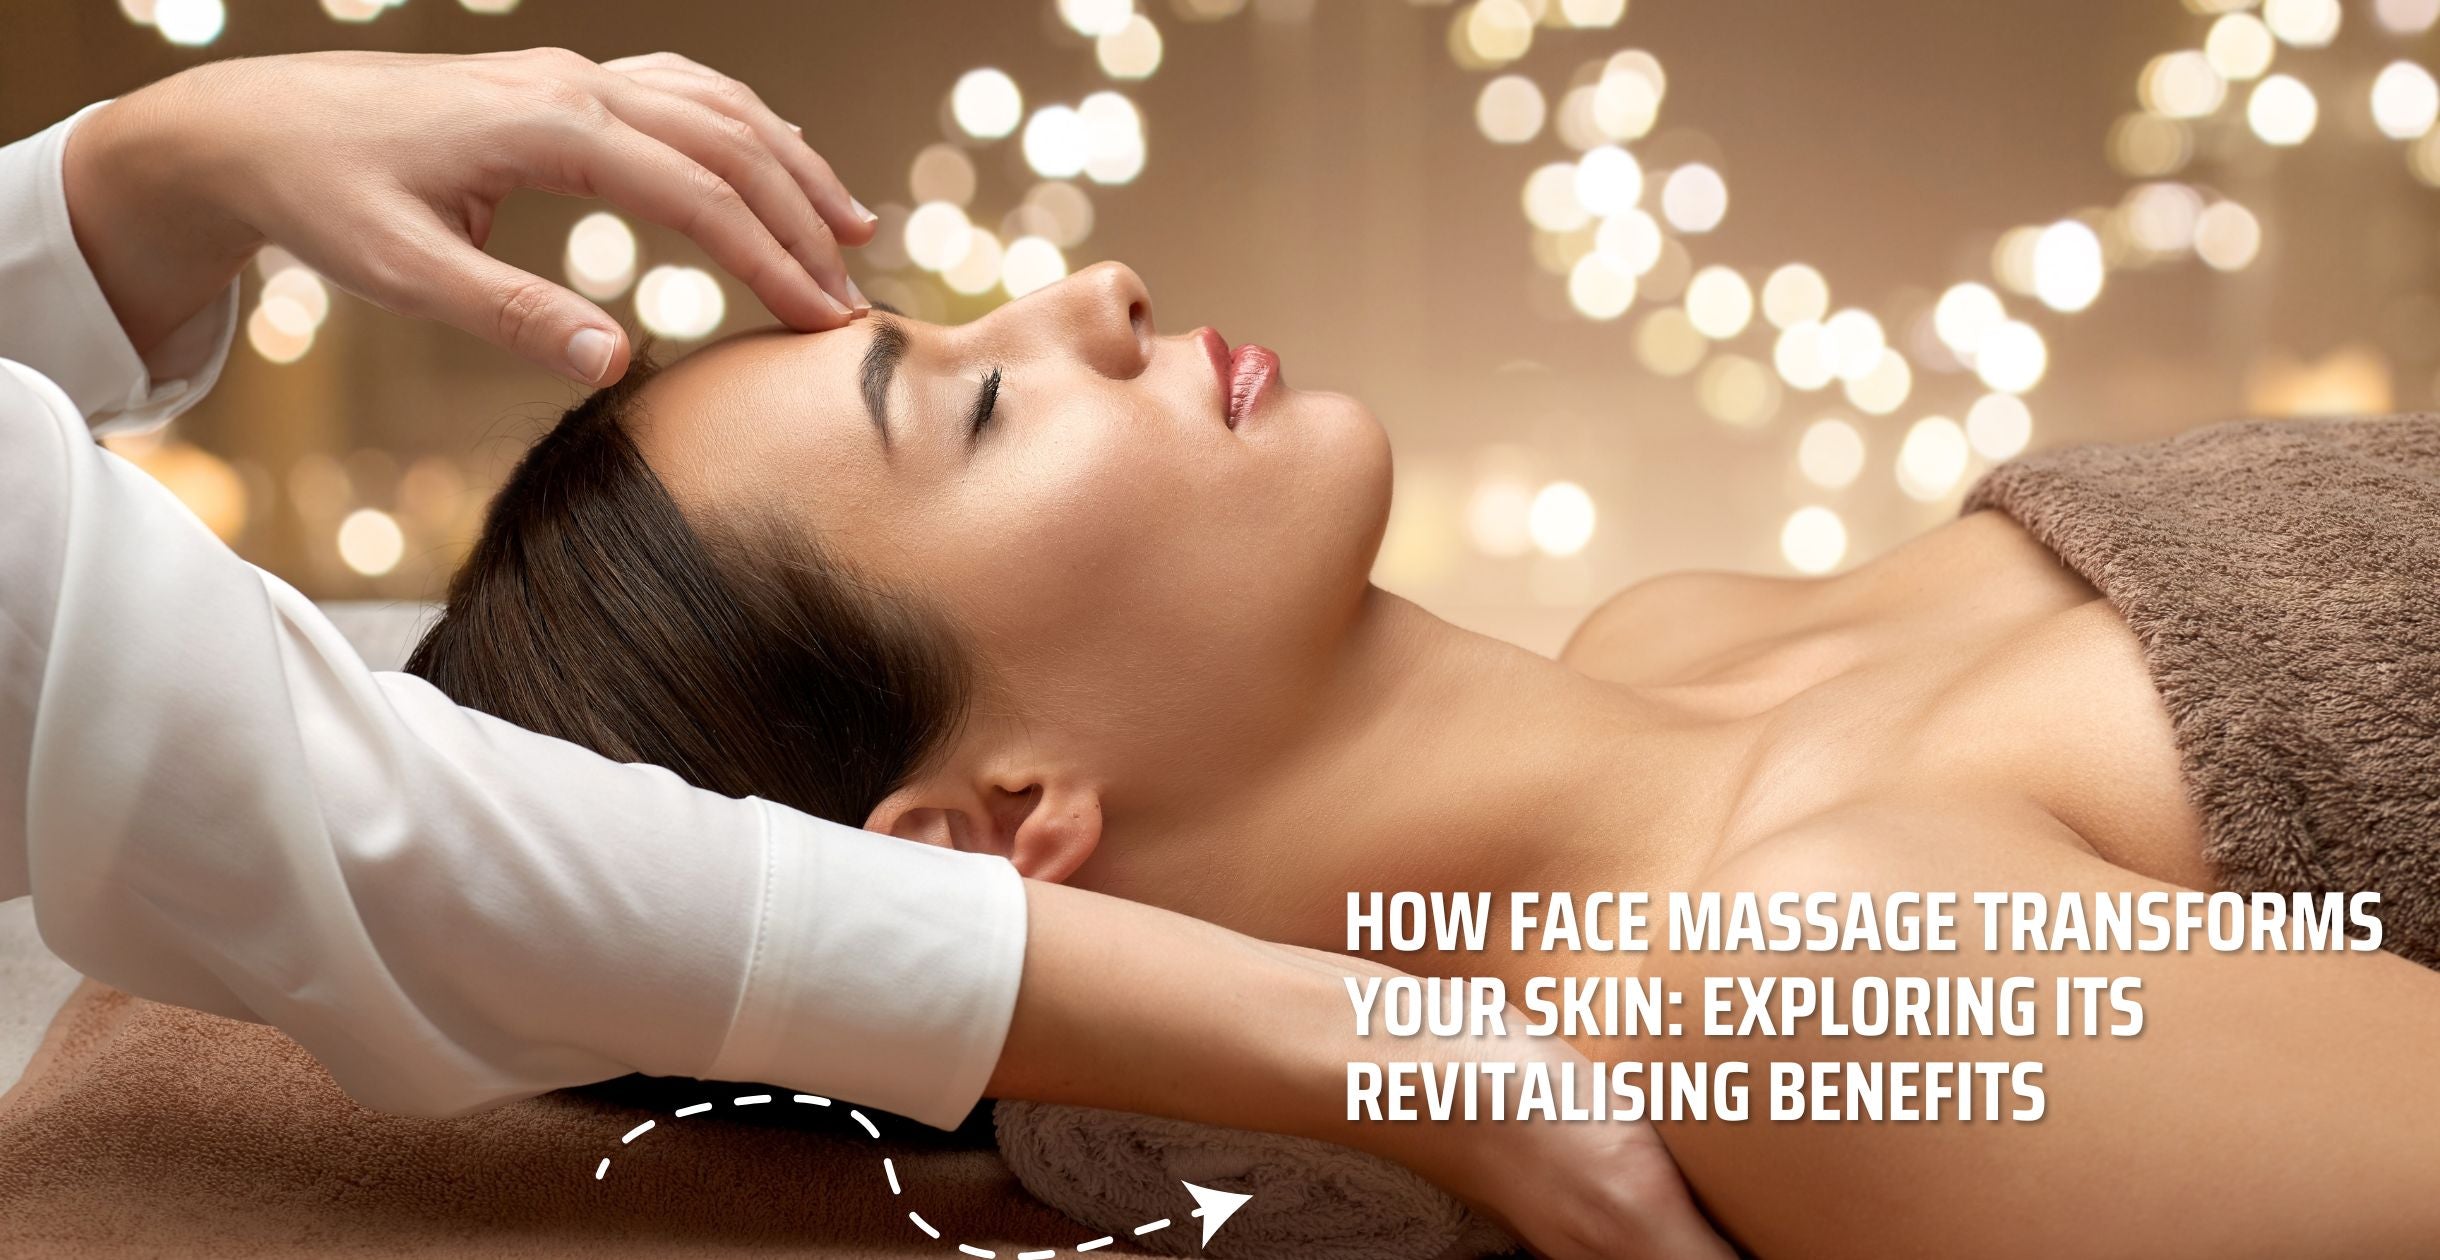 How Face Massage Transforms Your Skin: Exploring Its Revitalising Benefits